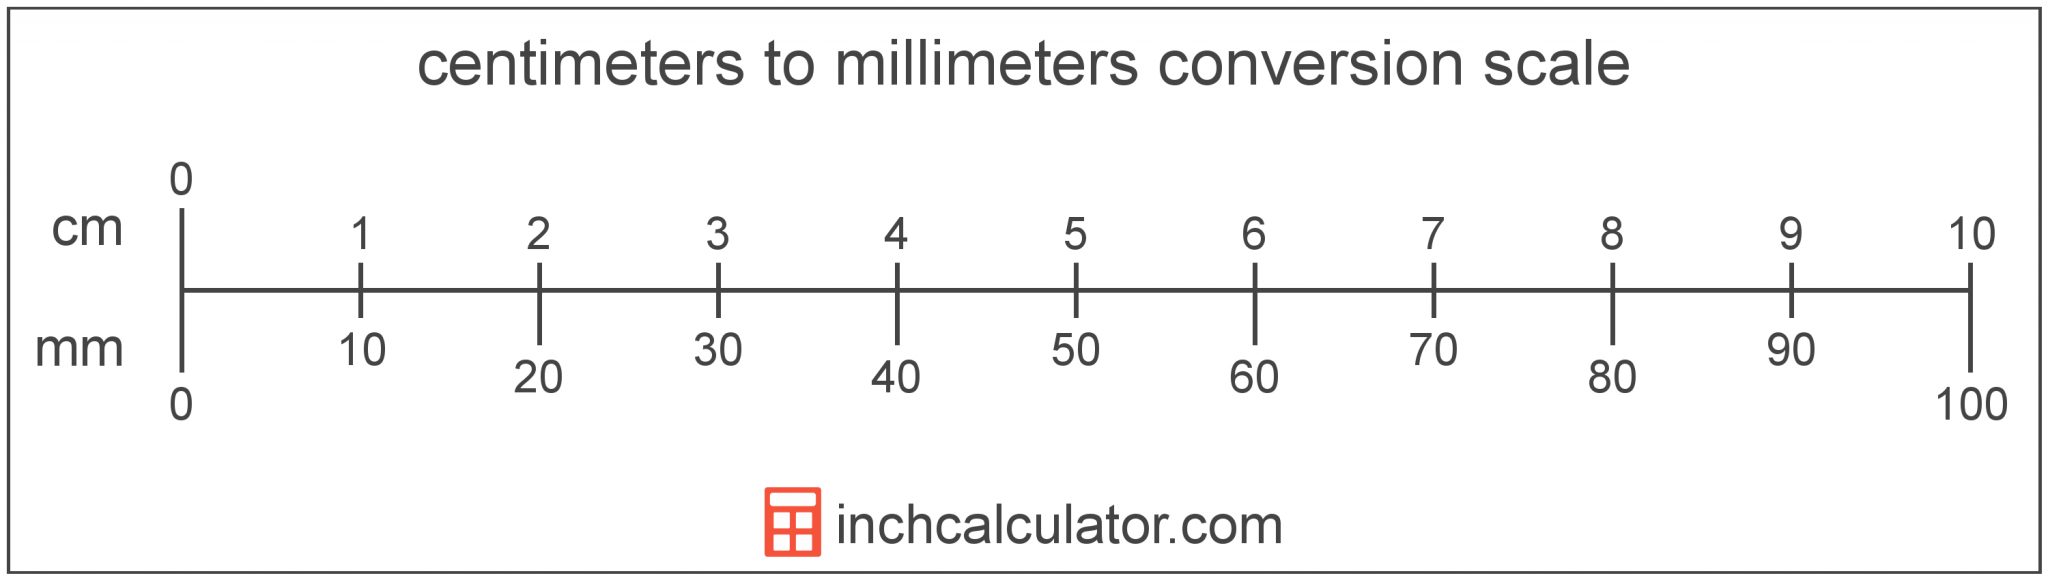 centimeters-to-millimeters-conversion-cm-to-mm-printable-ruler-actual-size